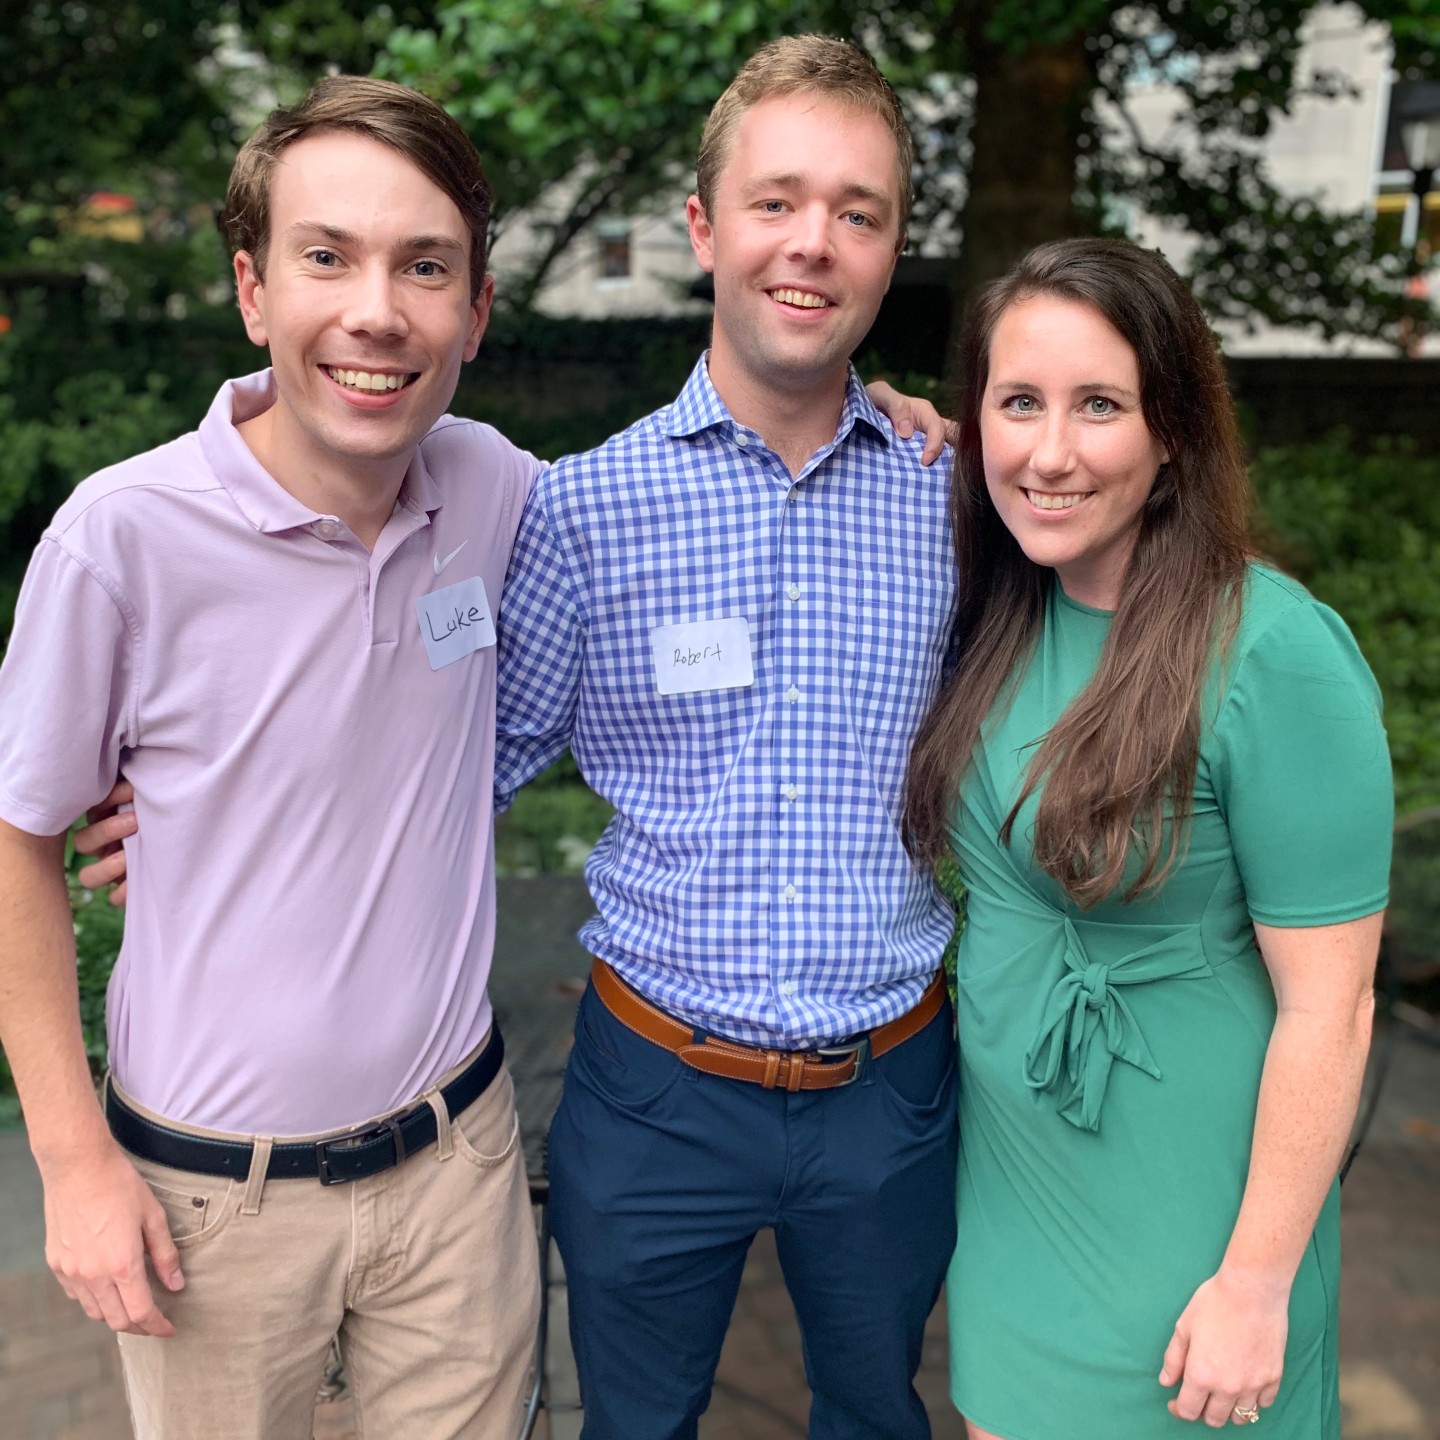 3 of the 4 interns pose for a photo op at the Peds Welcome Party 2021